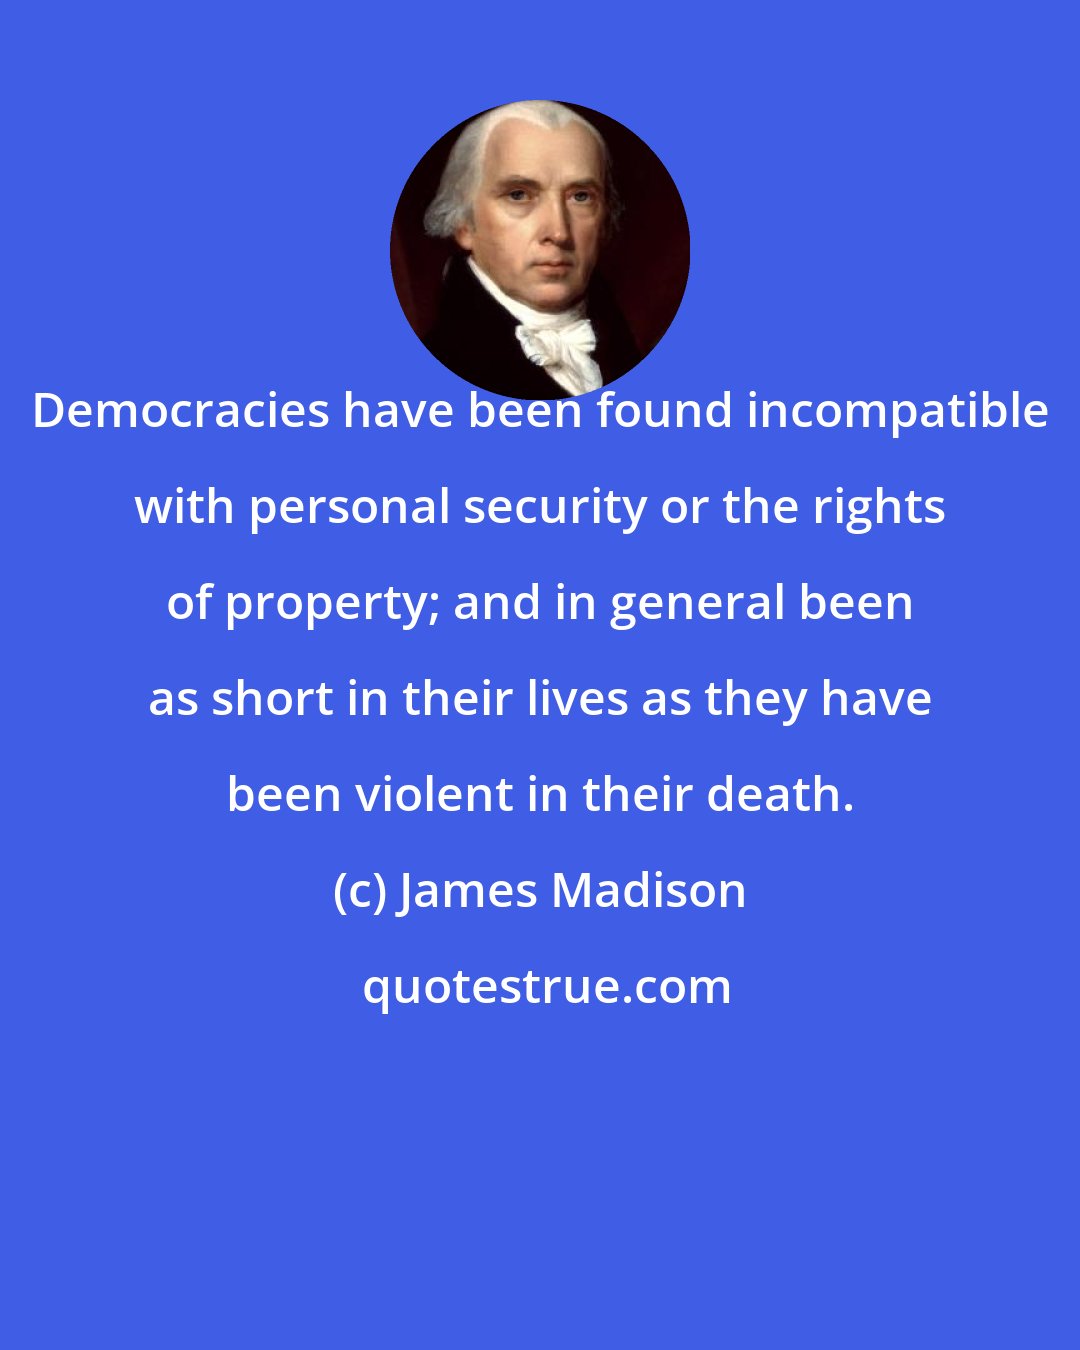 James Madison: Democracies have been found incompatible with personal security or the rights of property; and in general been as short in their lives as they have been violent in their death.